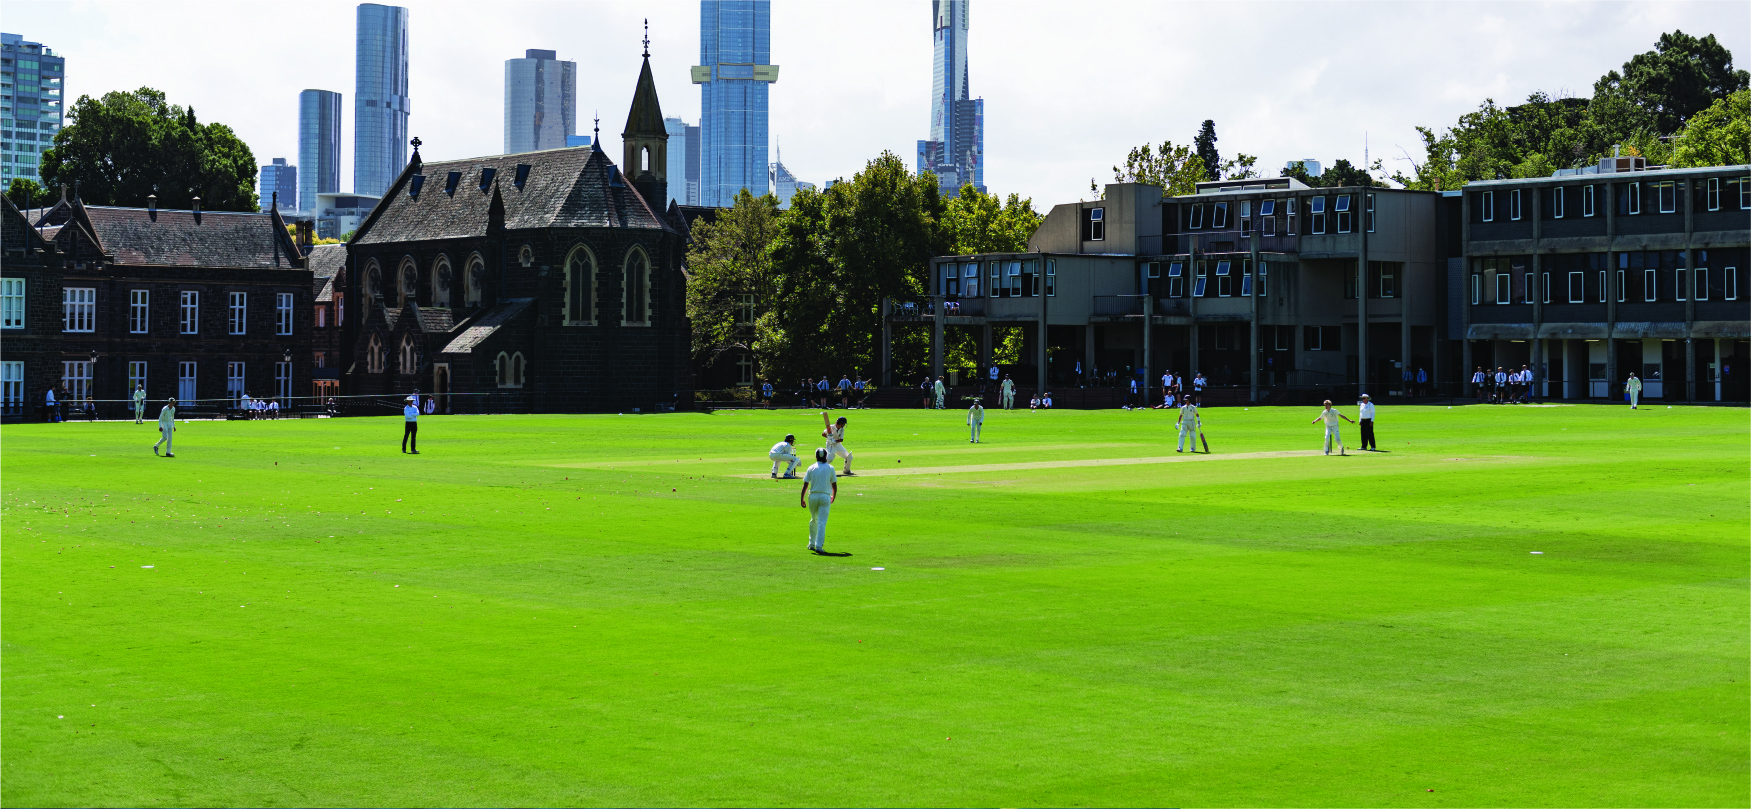 Cricket on the Main Oval